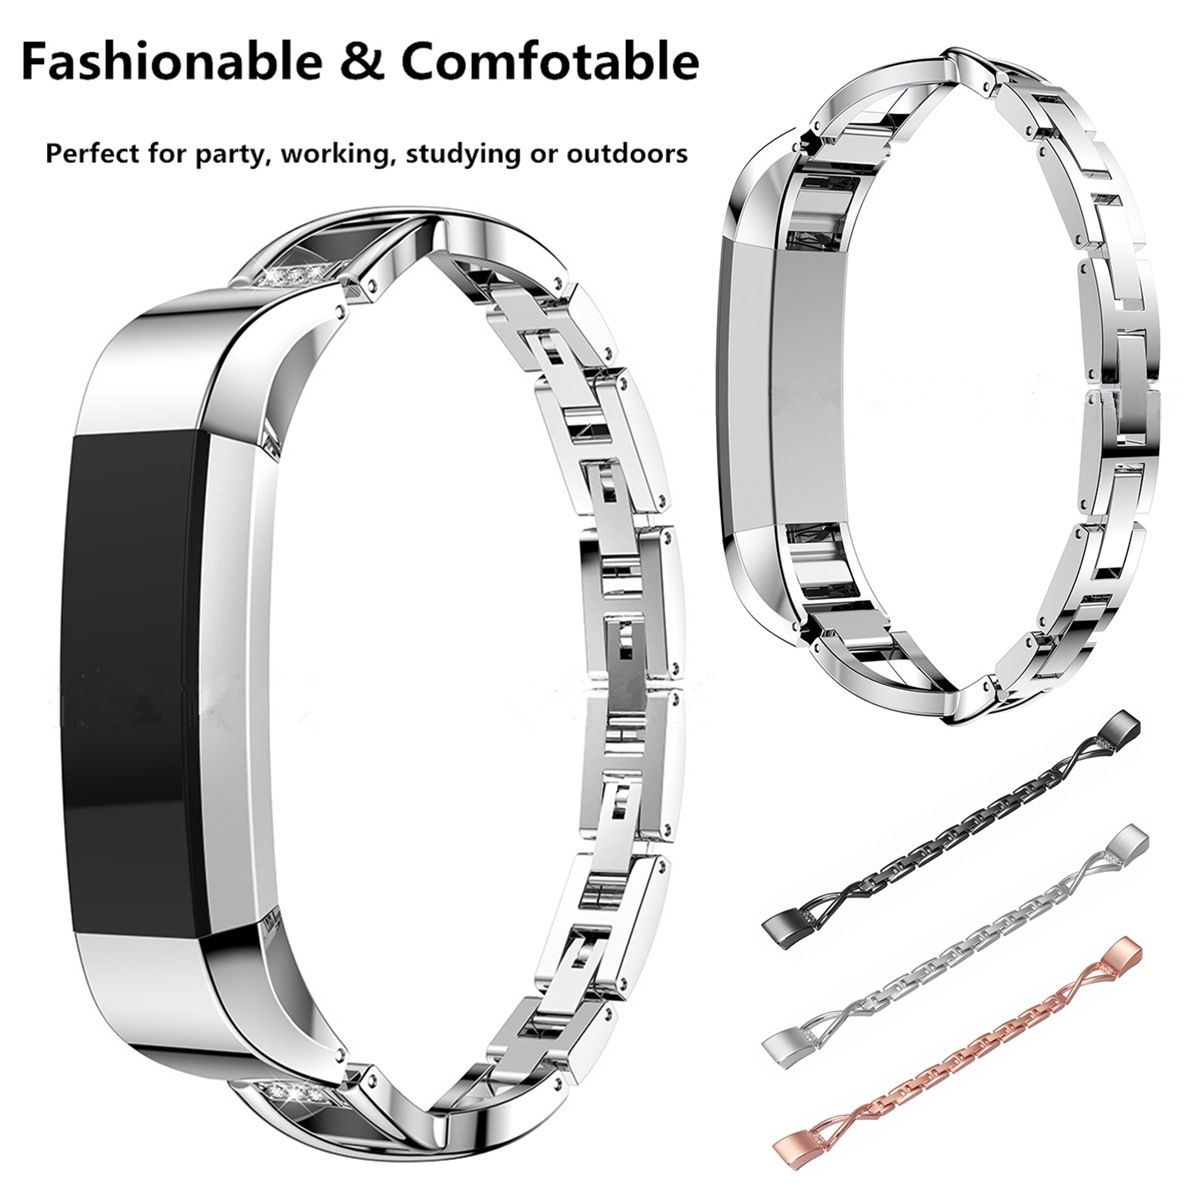 

Bakeey Replacement X Shape Stainless Steel Watch Band Strap Bracelet For Fitbit Alta HR